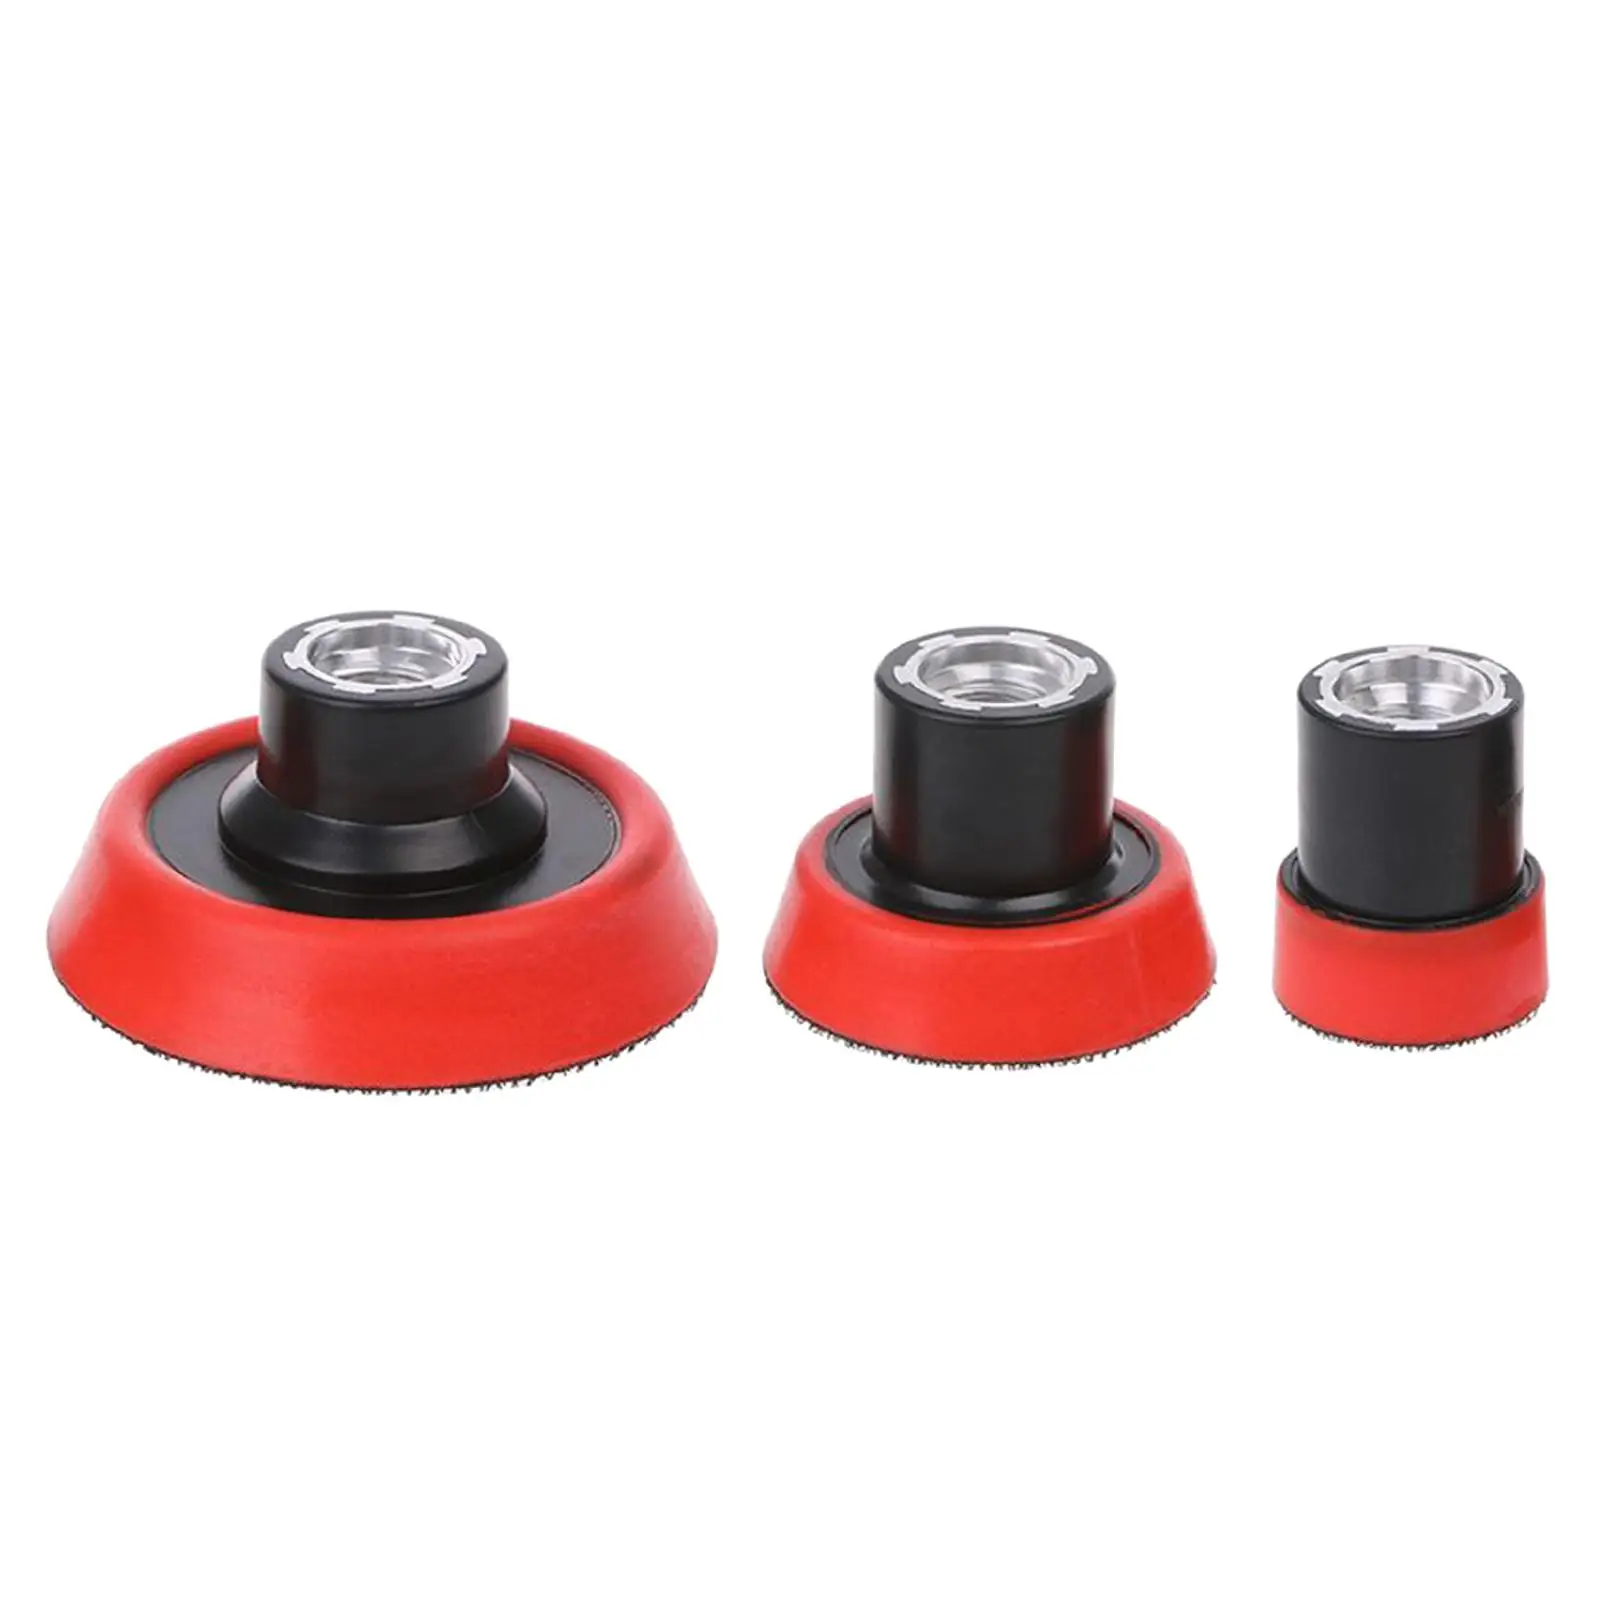 3 Pieces M10 Parts Buffering Durable Backer Tools Set Backing Plate Polisher